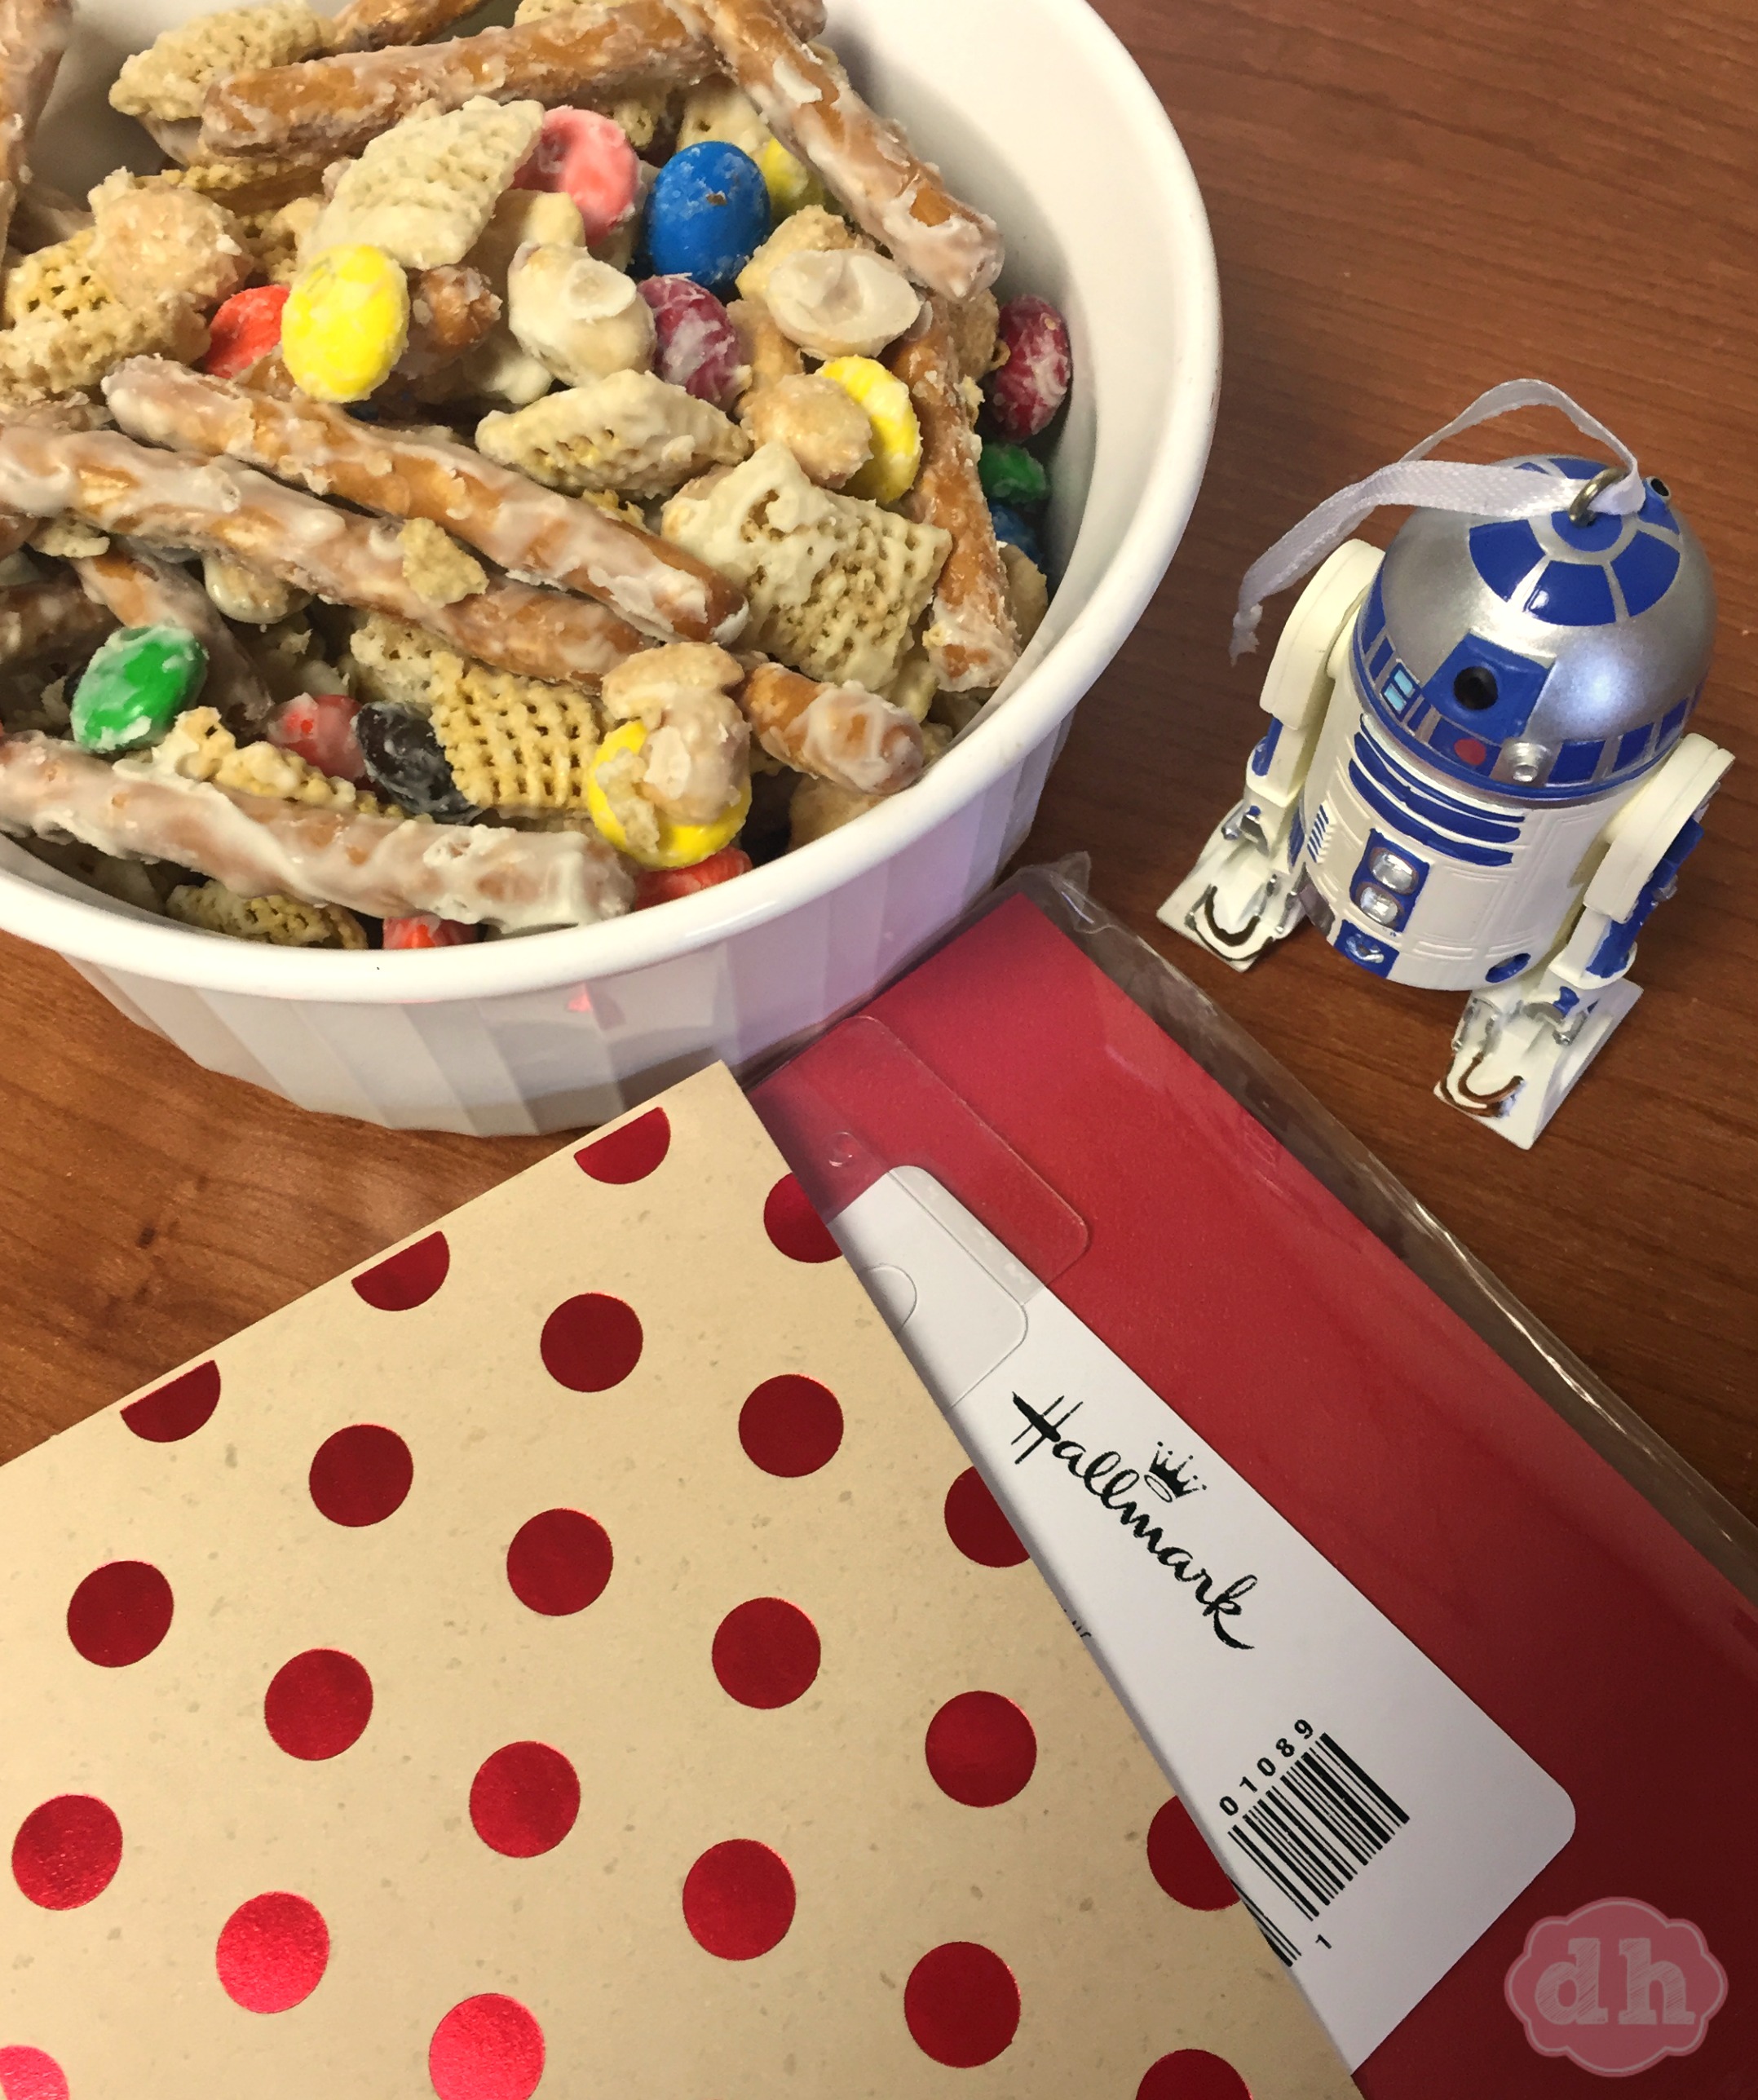 Keeping Traditions with Hallmark and My Mom's White Chocolate Party Mix